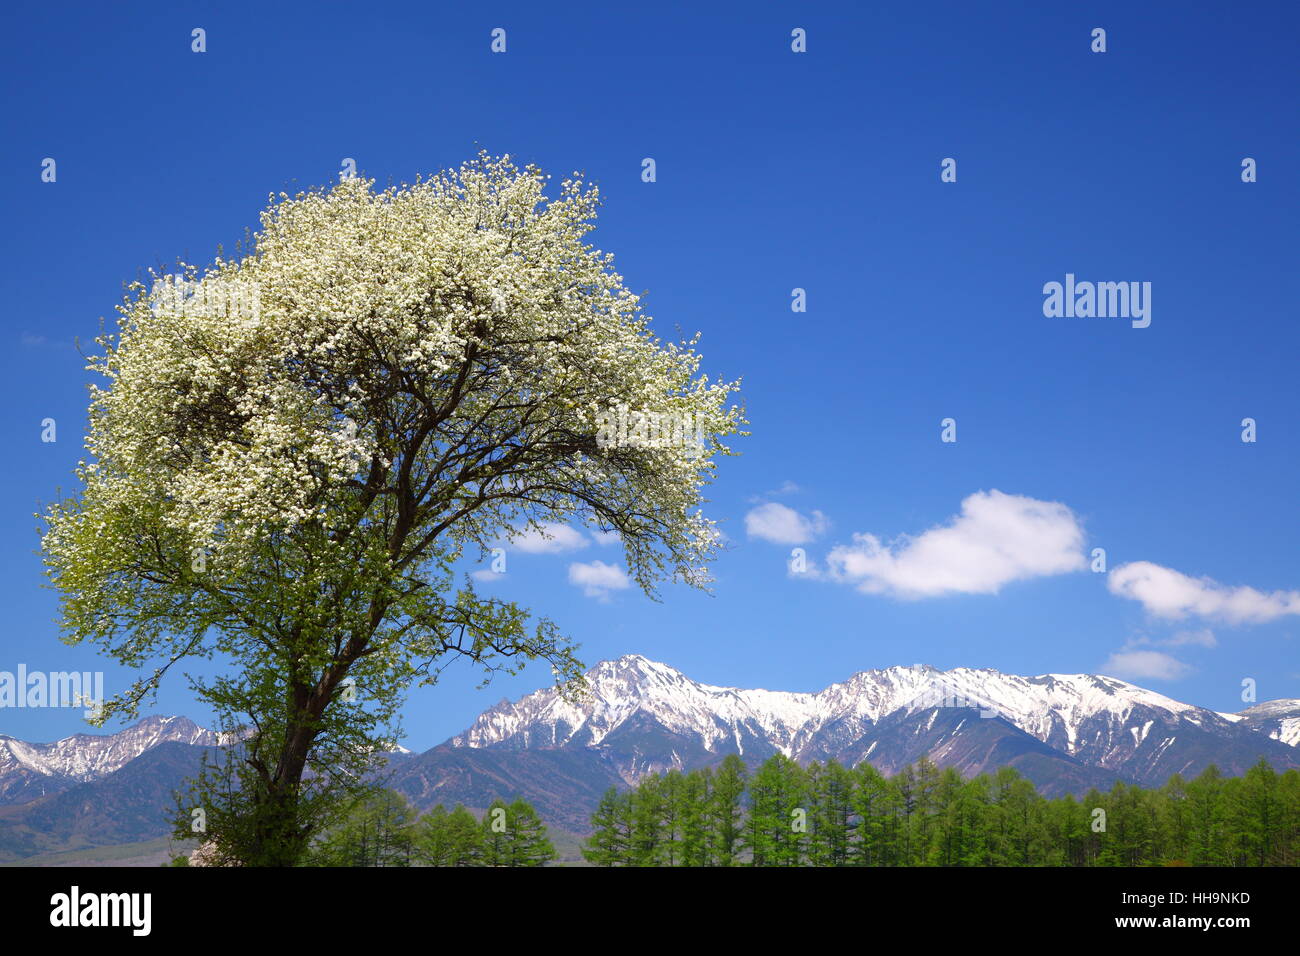 tree, flower, plant, japan, mountain, lawn, green, forest, fresh, nature, Stock Photo